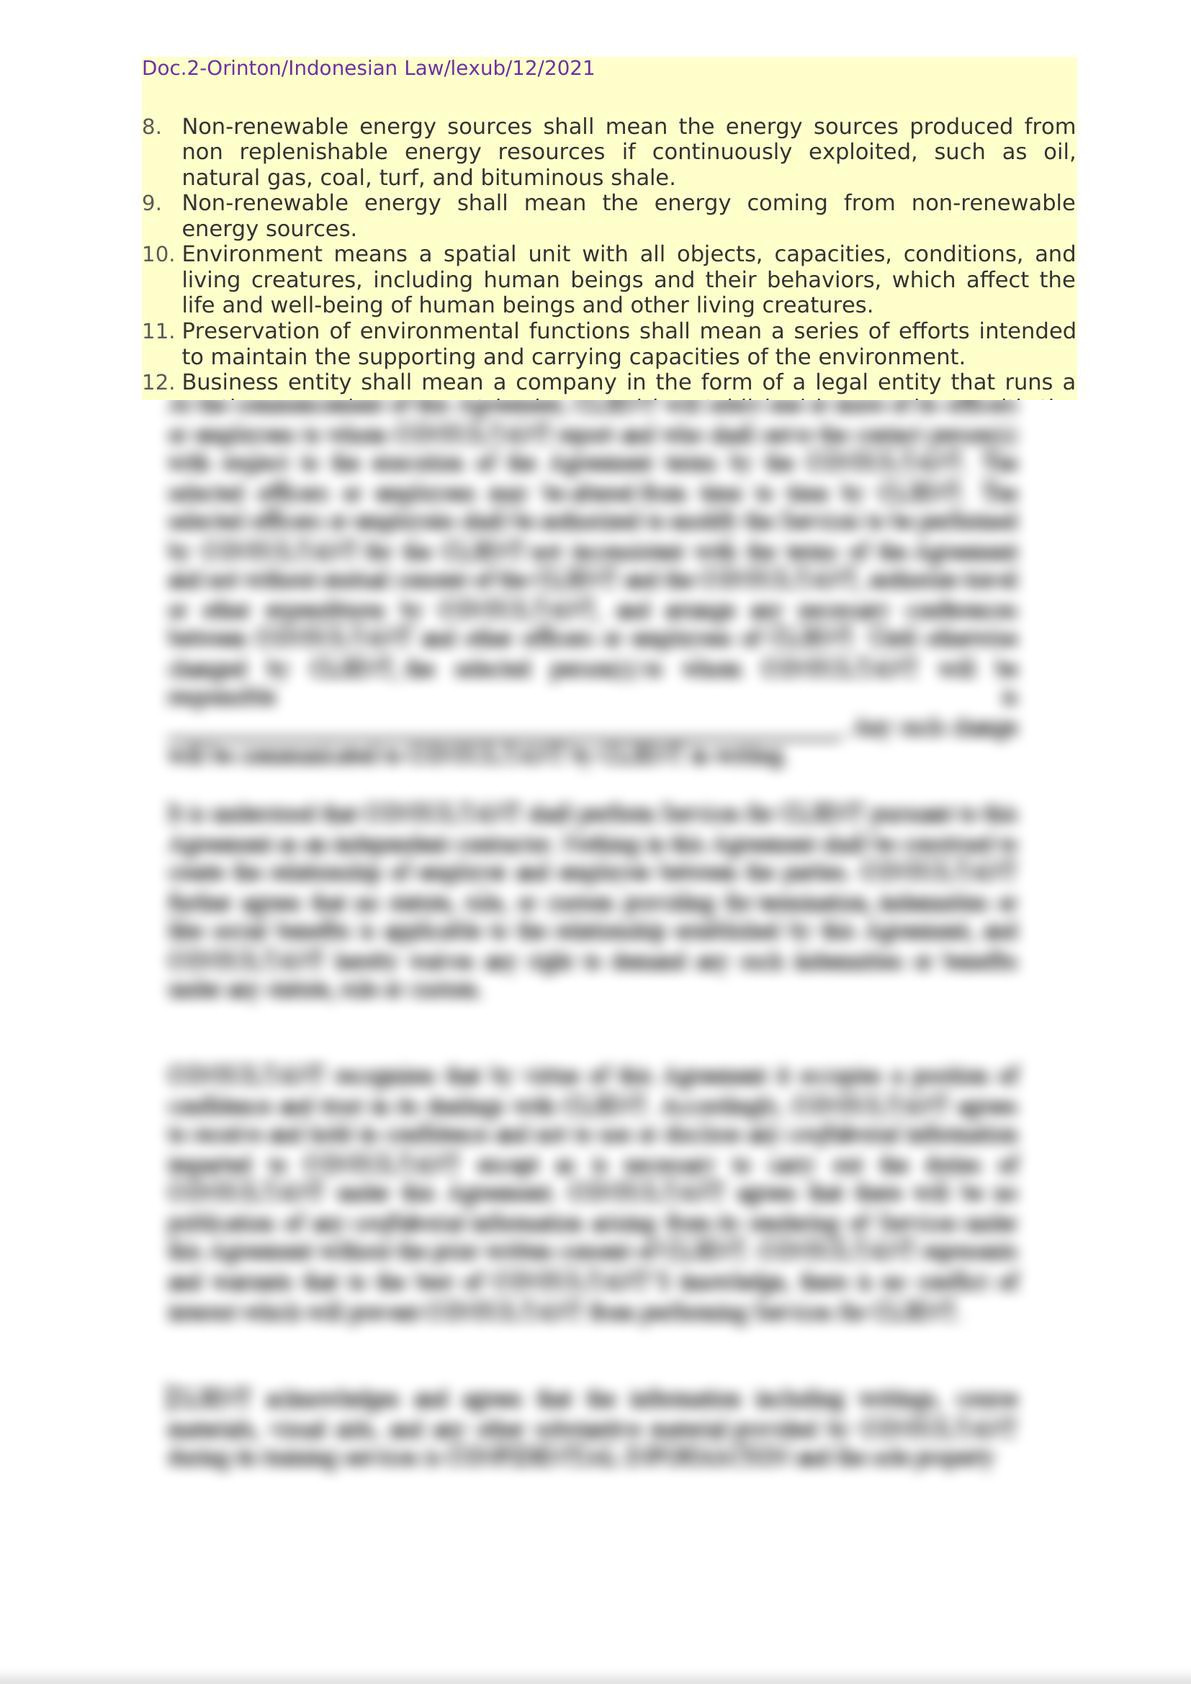 The Law of Republic of Indonesia Number 30 of 2007 concerning Energy-1